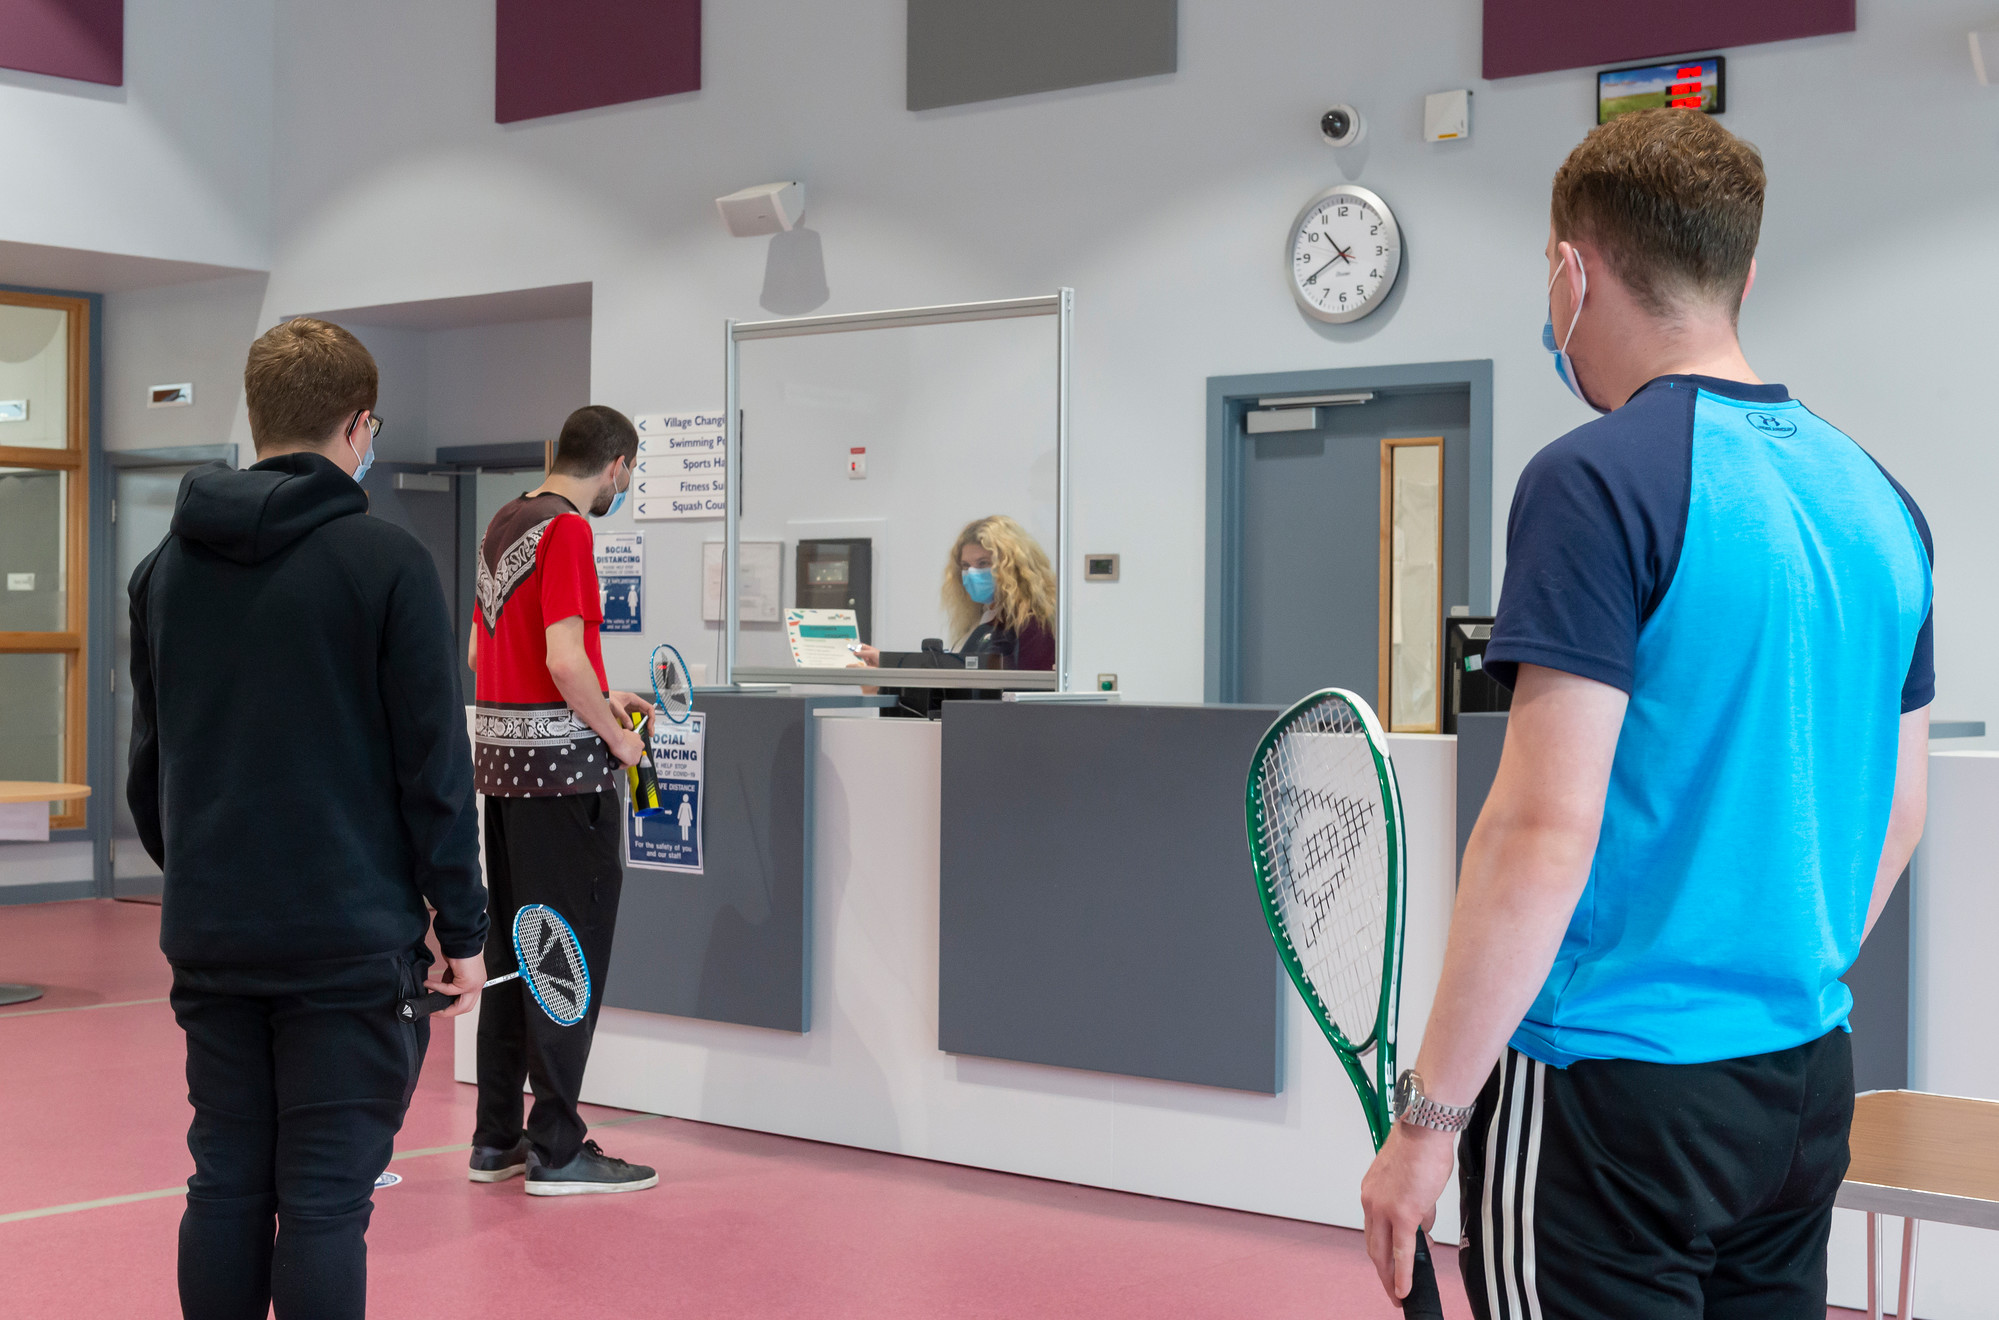 Customers are pictured queuing in a socially-distanced way in an Aberdeenshire sports facility.